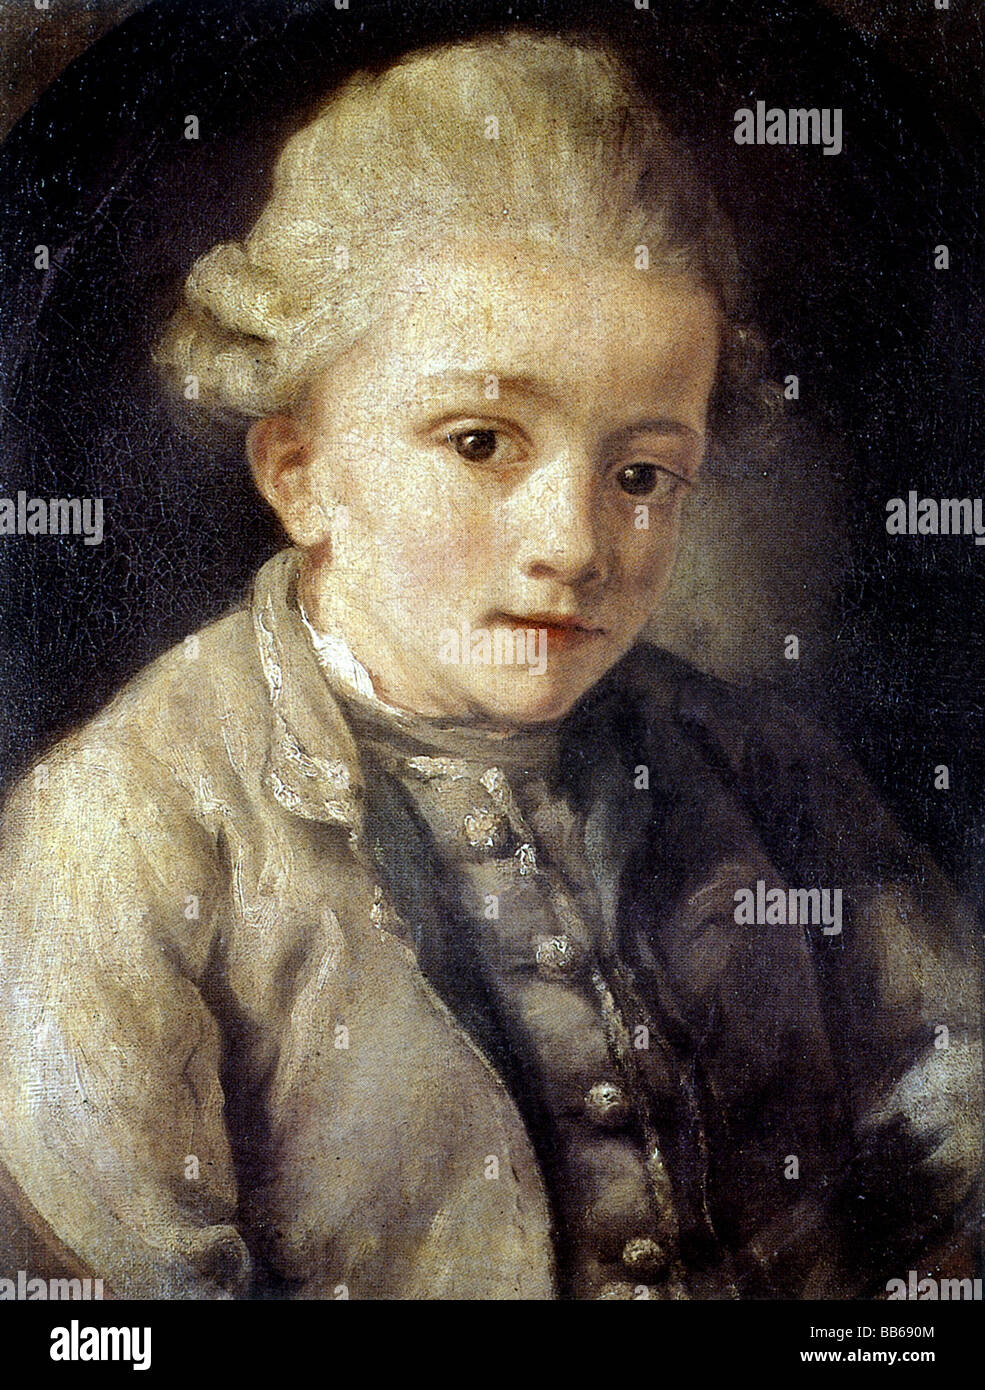 Mozart, Wolfgang Amadeus, 27.1.1756 - 5.12.1791, Austrian composer, portrait (unauthenticated), painting, attributed to Jean Baptiste Greuze (1725 - 1805), 1763 - 1764, Stock Photo